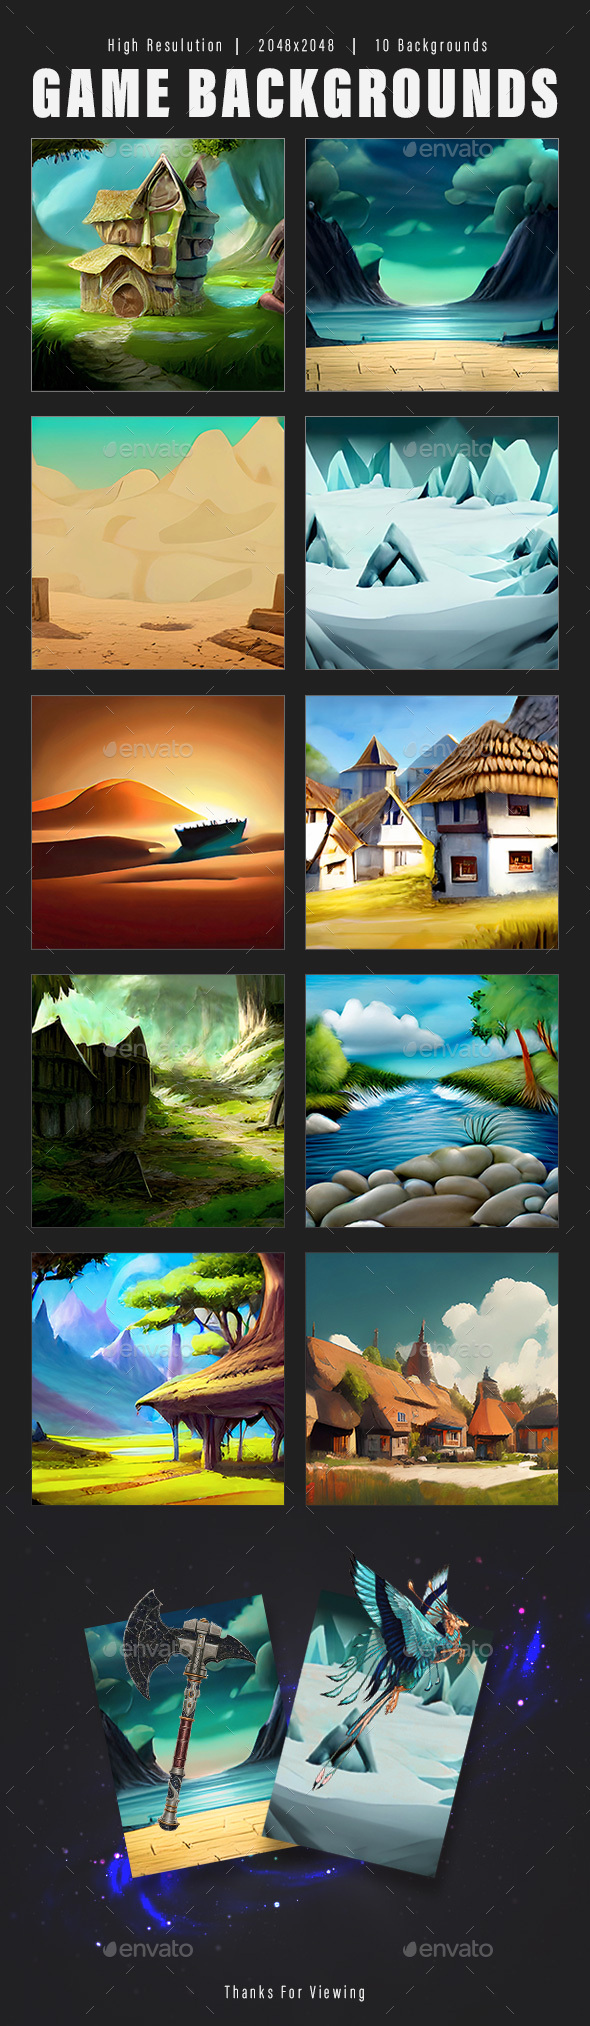 10 High Resolution Game backgrounds for Game Character